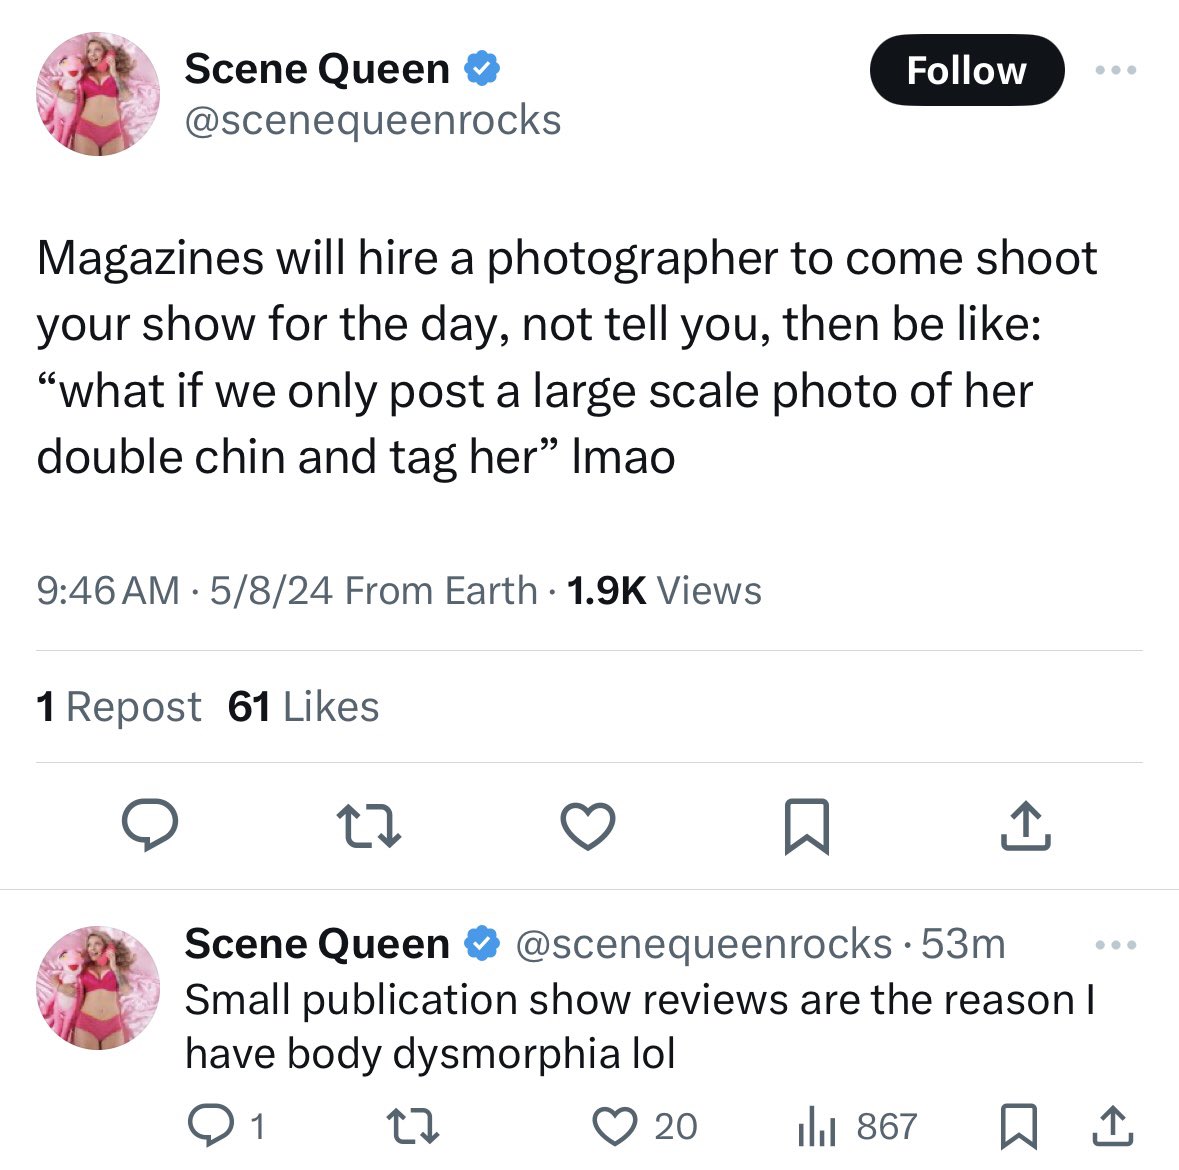 Reposting this from @scenequeenrocks We all need to be aware of what images we put out there and how shite photos may affect the artist. Doesn’t matter if you are working for someone small or large. The message is the same.